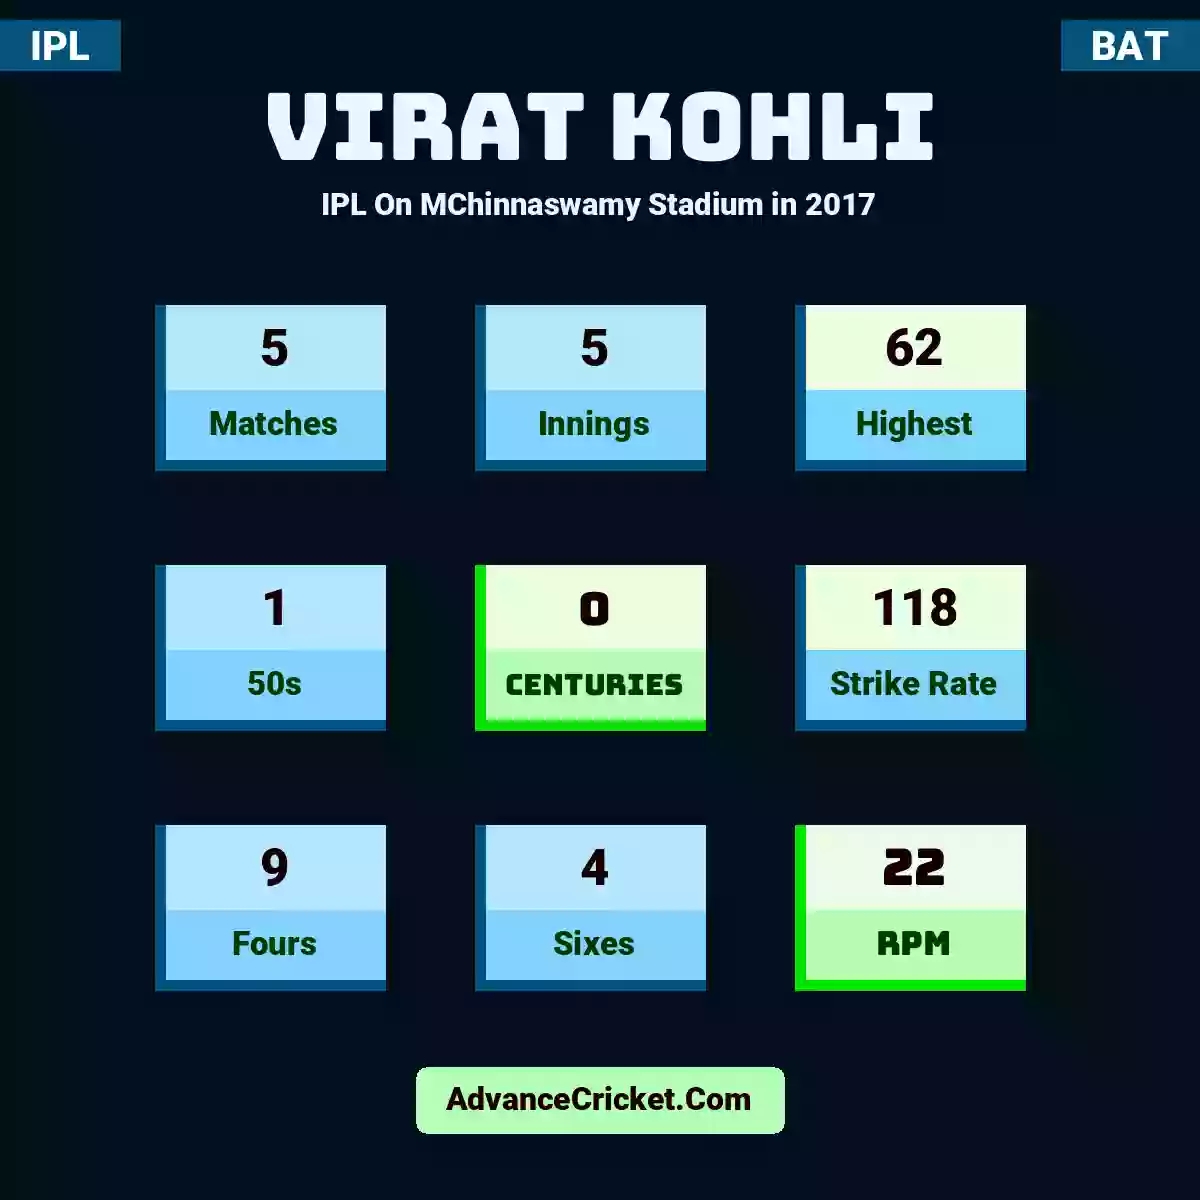 Virat Kohli IPL  On MChinnaswamy Stadium in 2017, Virat Kohli played 5 matches, scored 62 runs as highest, 1 half-centuries, and 0 centuries, with a strike rate of 118. V.Kohli hit 9 fours and 4 sixes, with an RPM of 22.